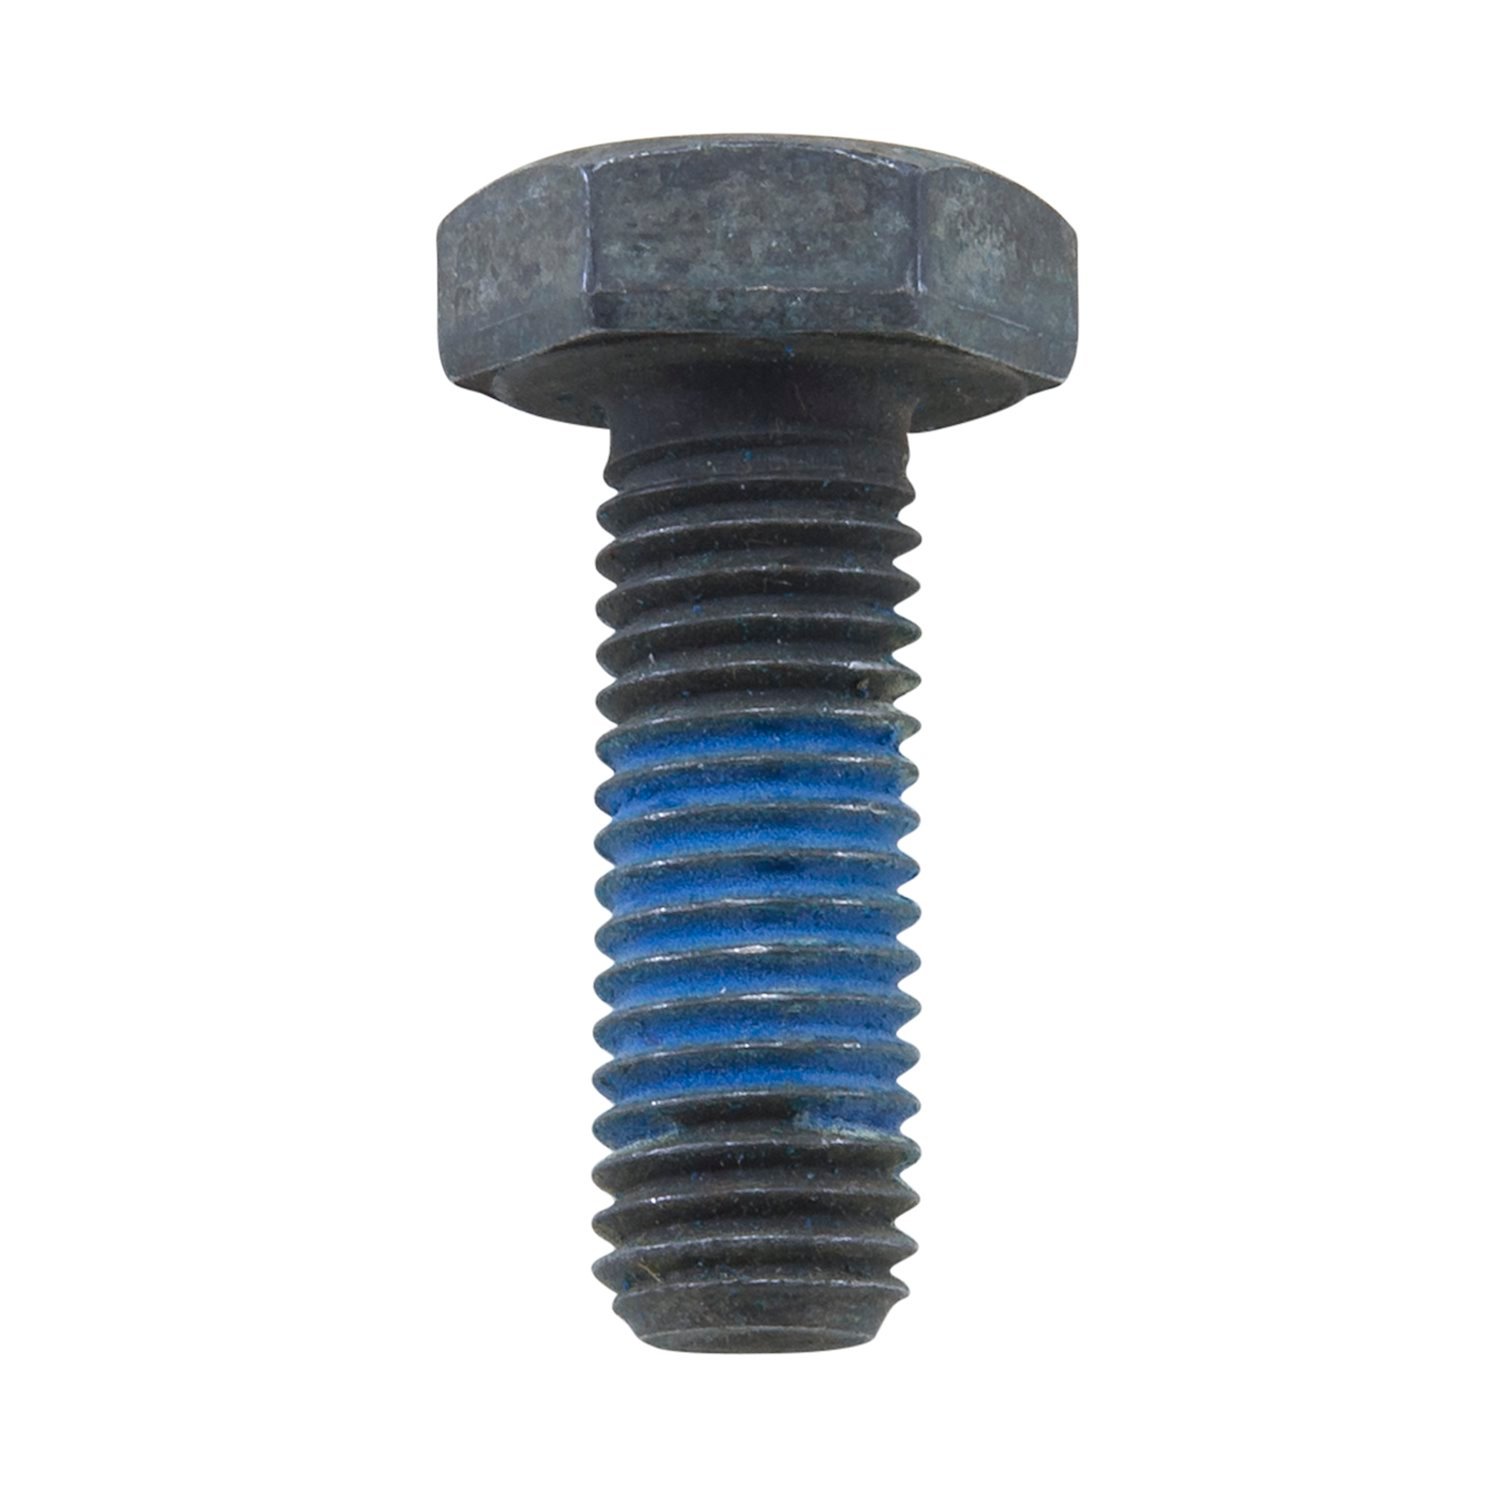 Replacement Ring Gear Bolt For Dana S110. 15/16 in. Head.